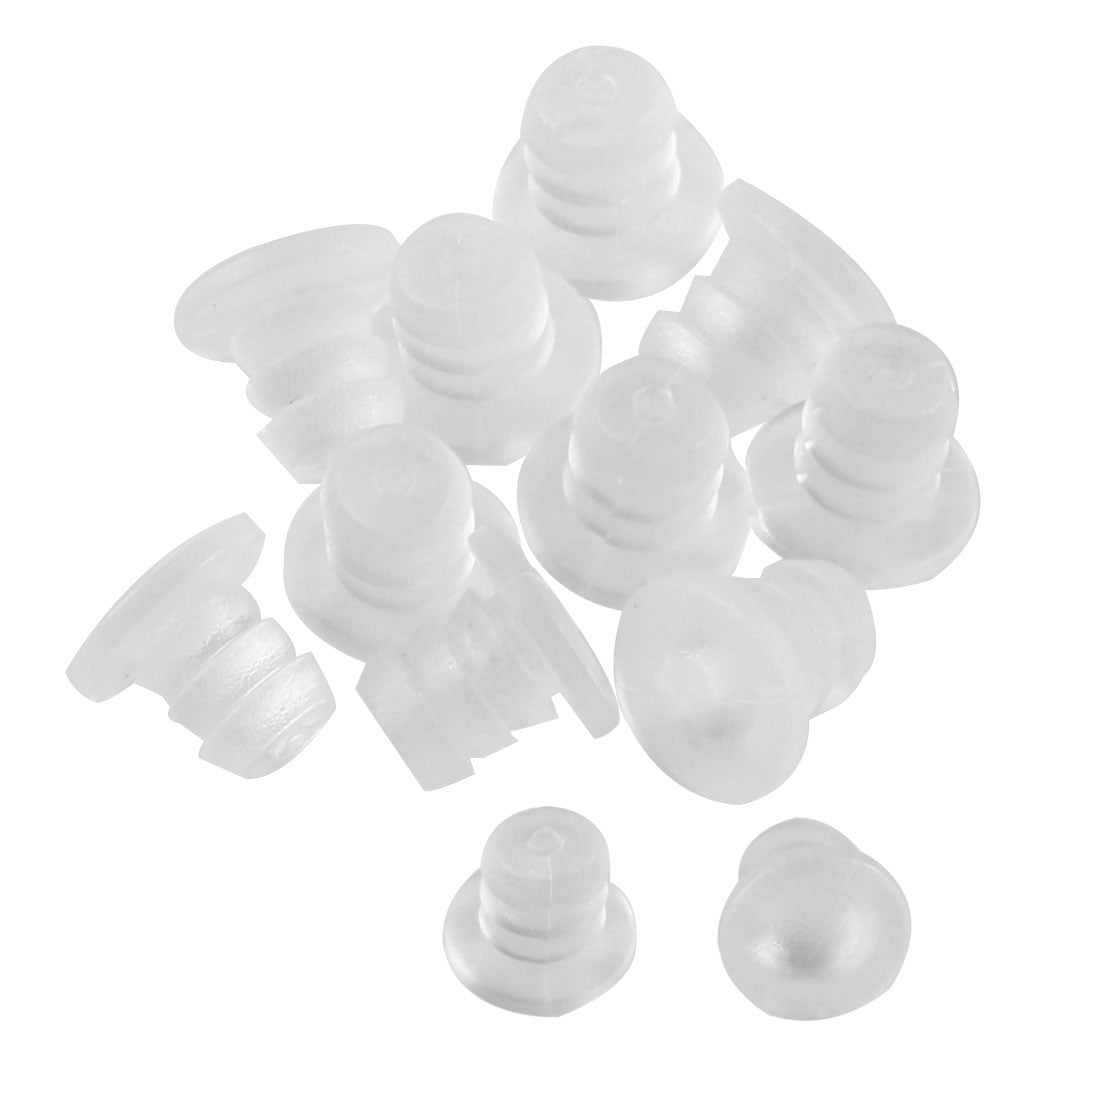 12pcs 5mm Clear Soft Stem Bumpers Glide, Patio Outdoor Furniture Glass ...